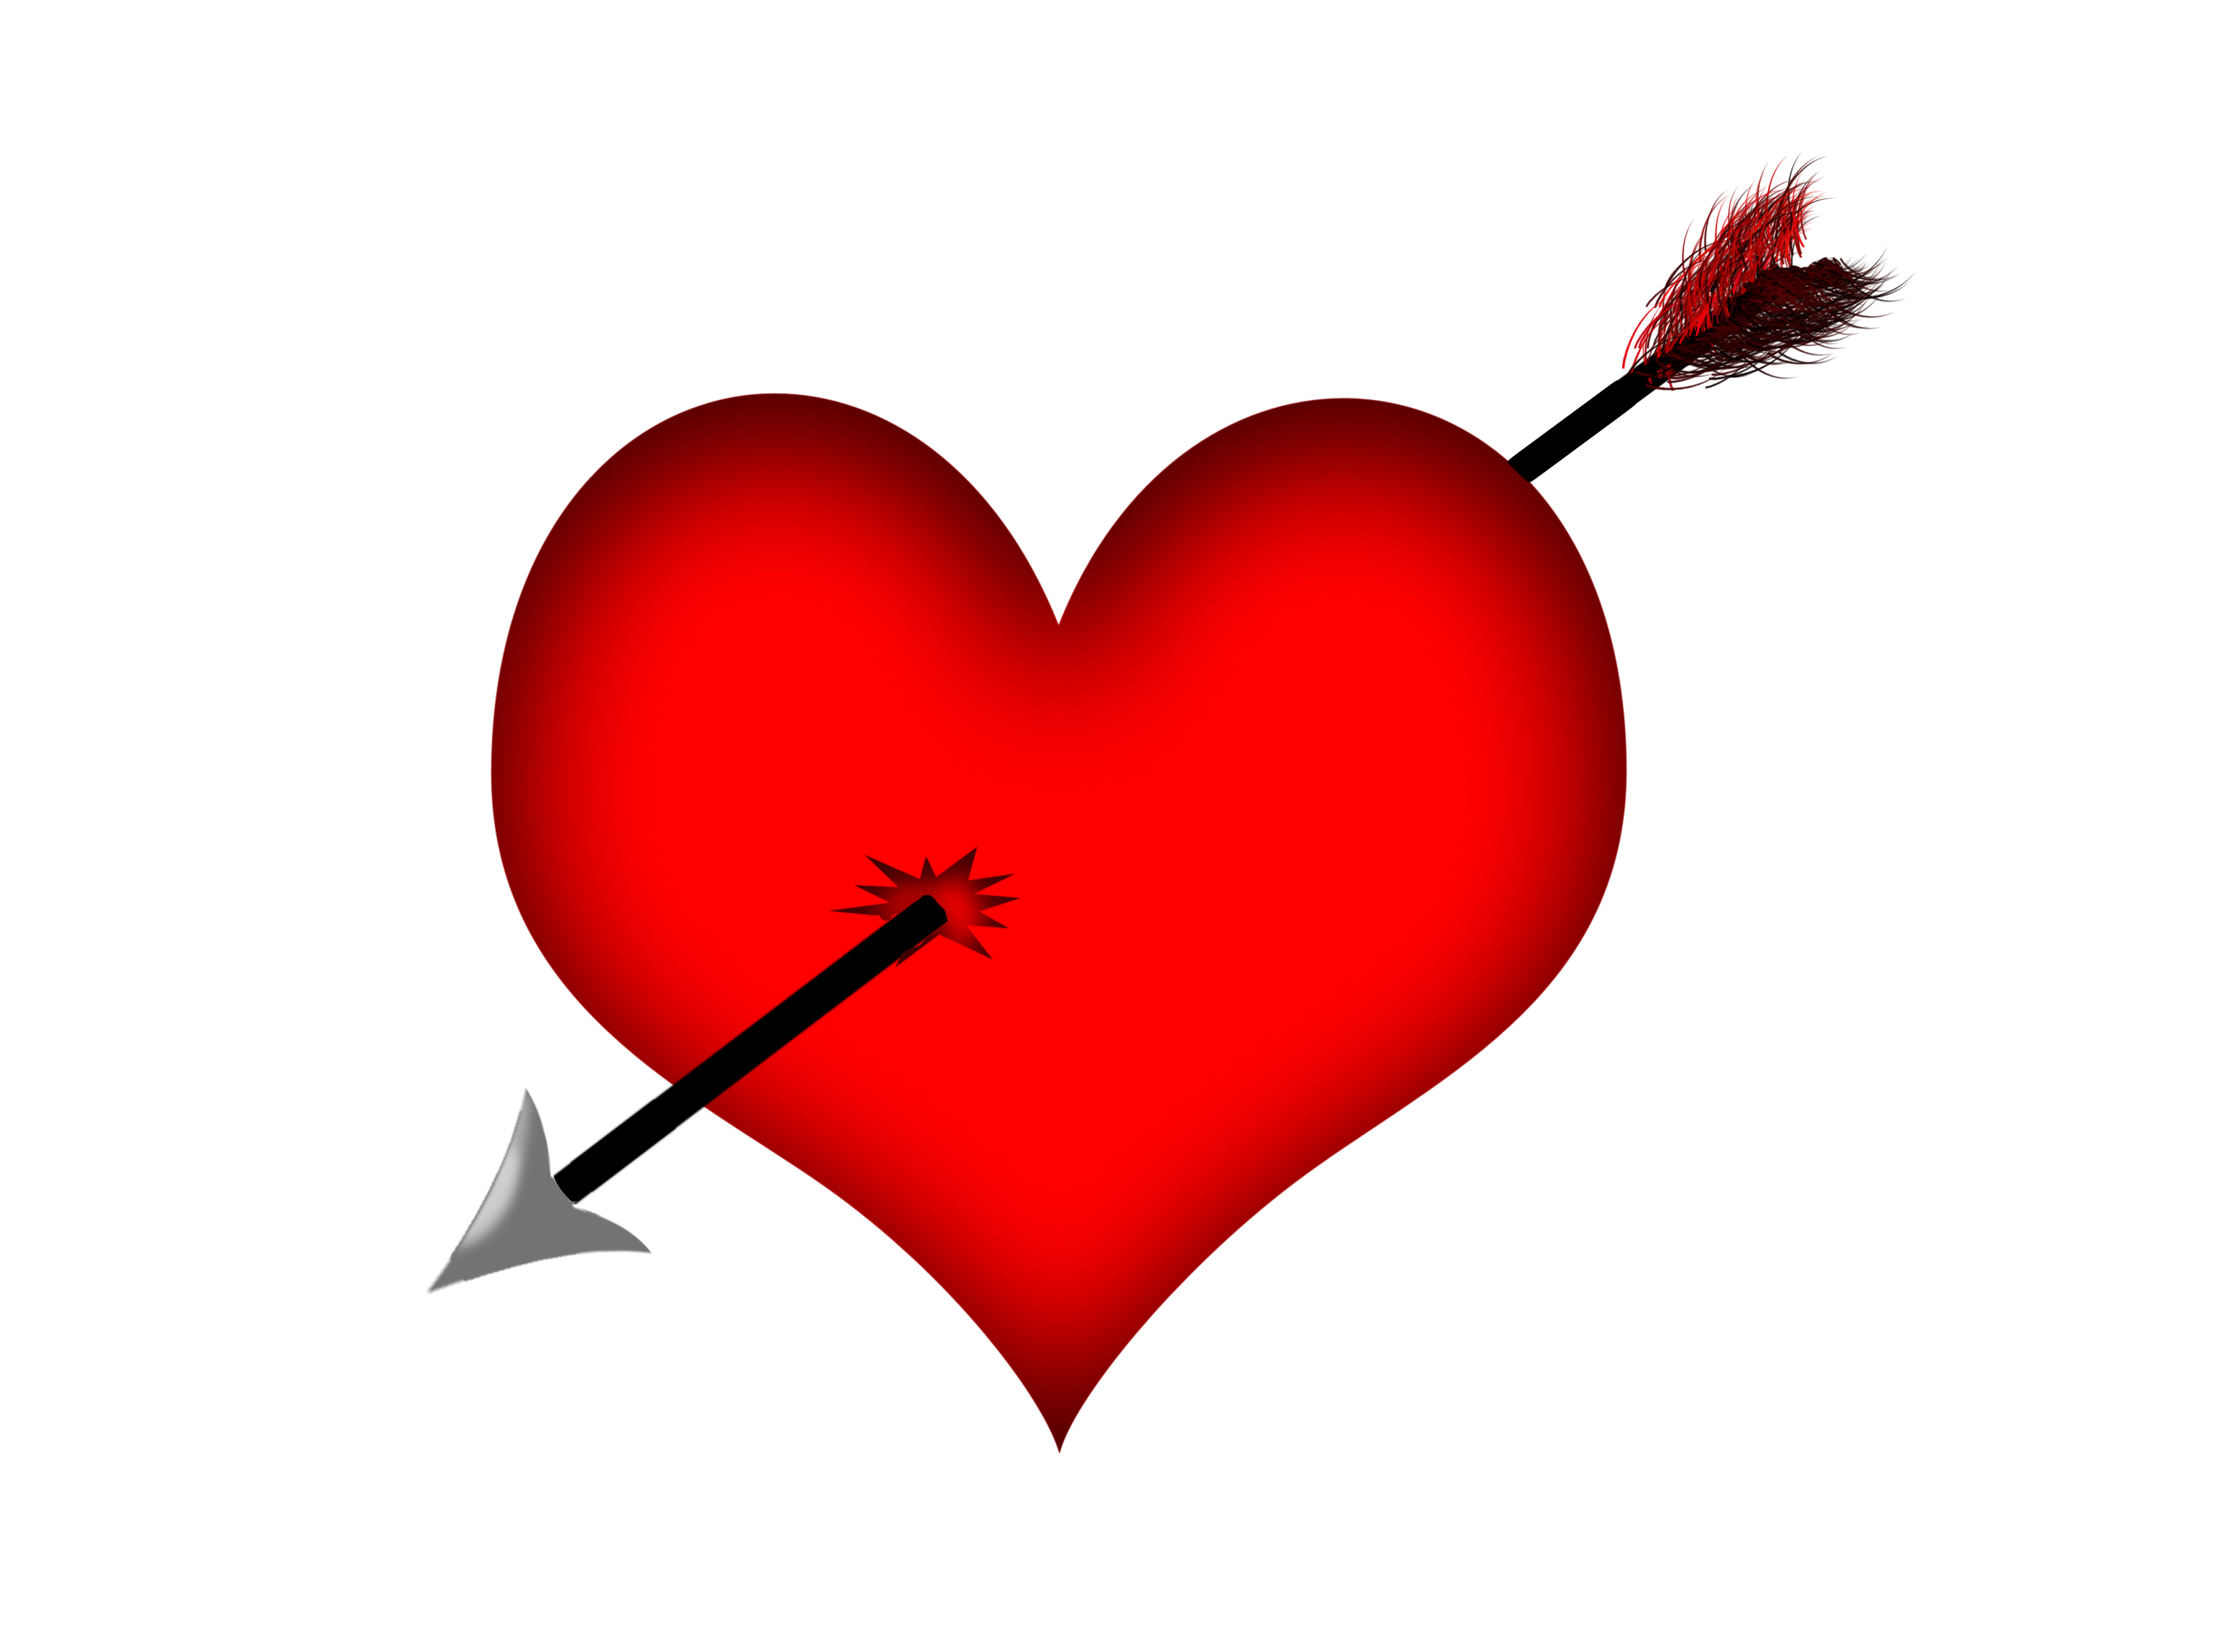 Heart With A Arrow Through It Images & Pictures - Becuo